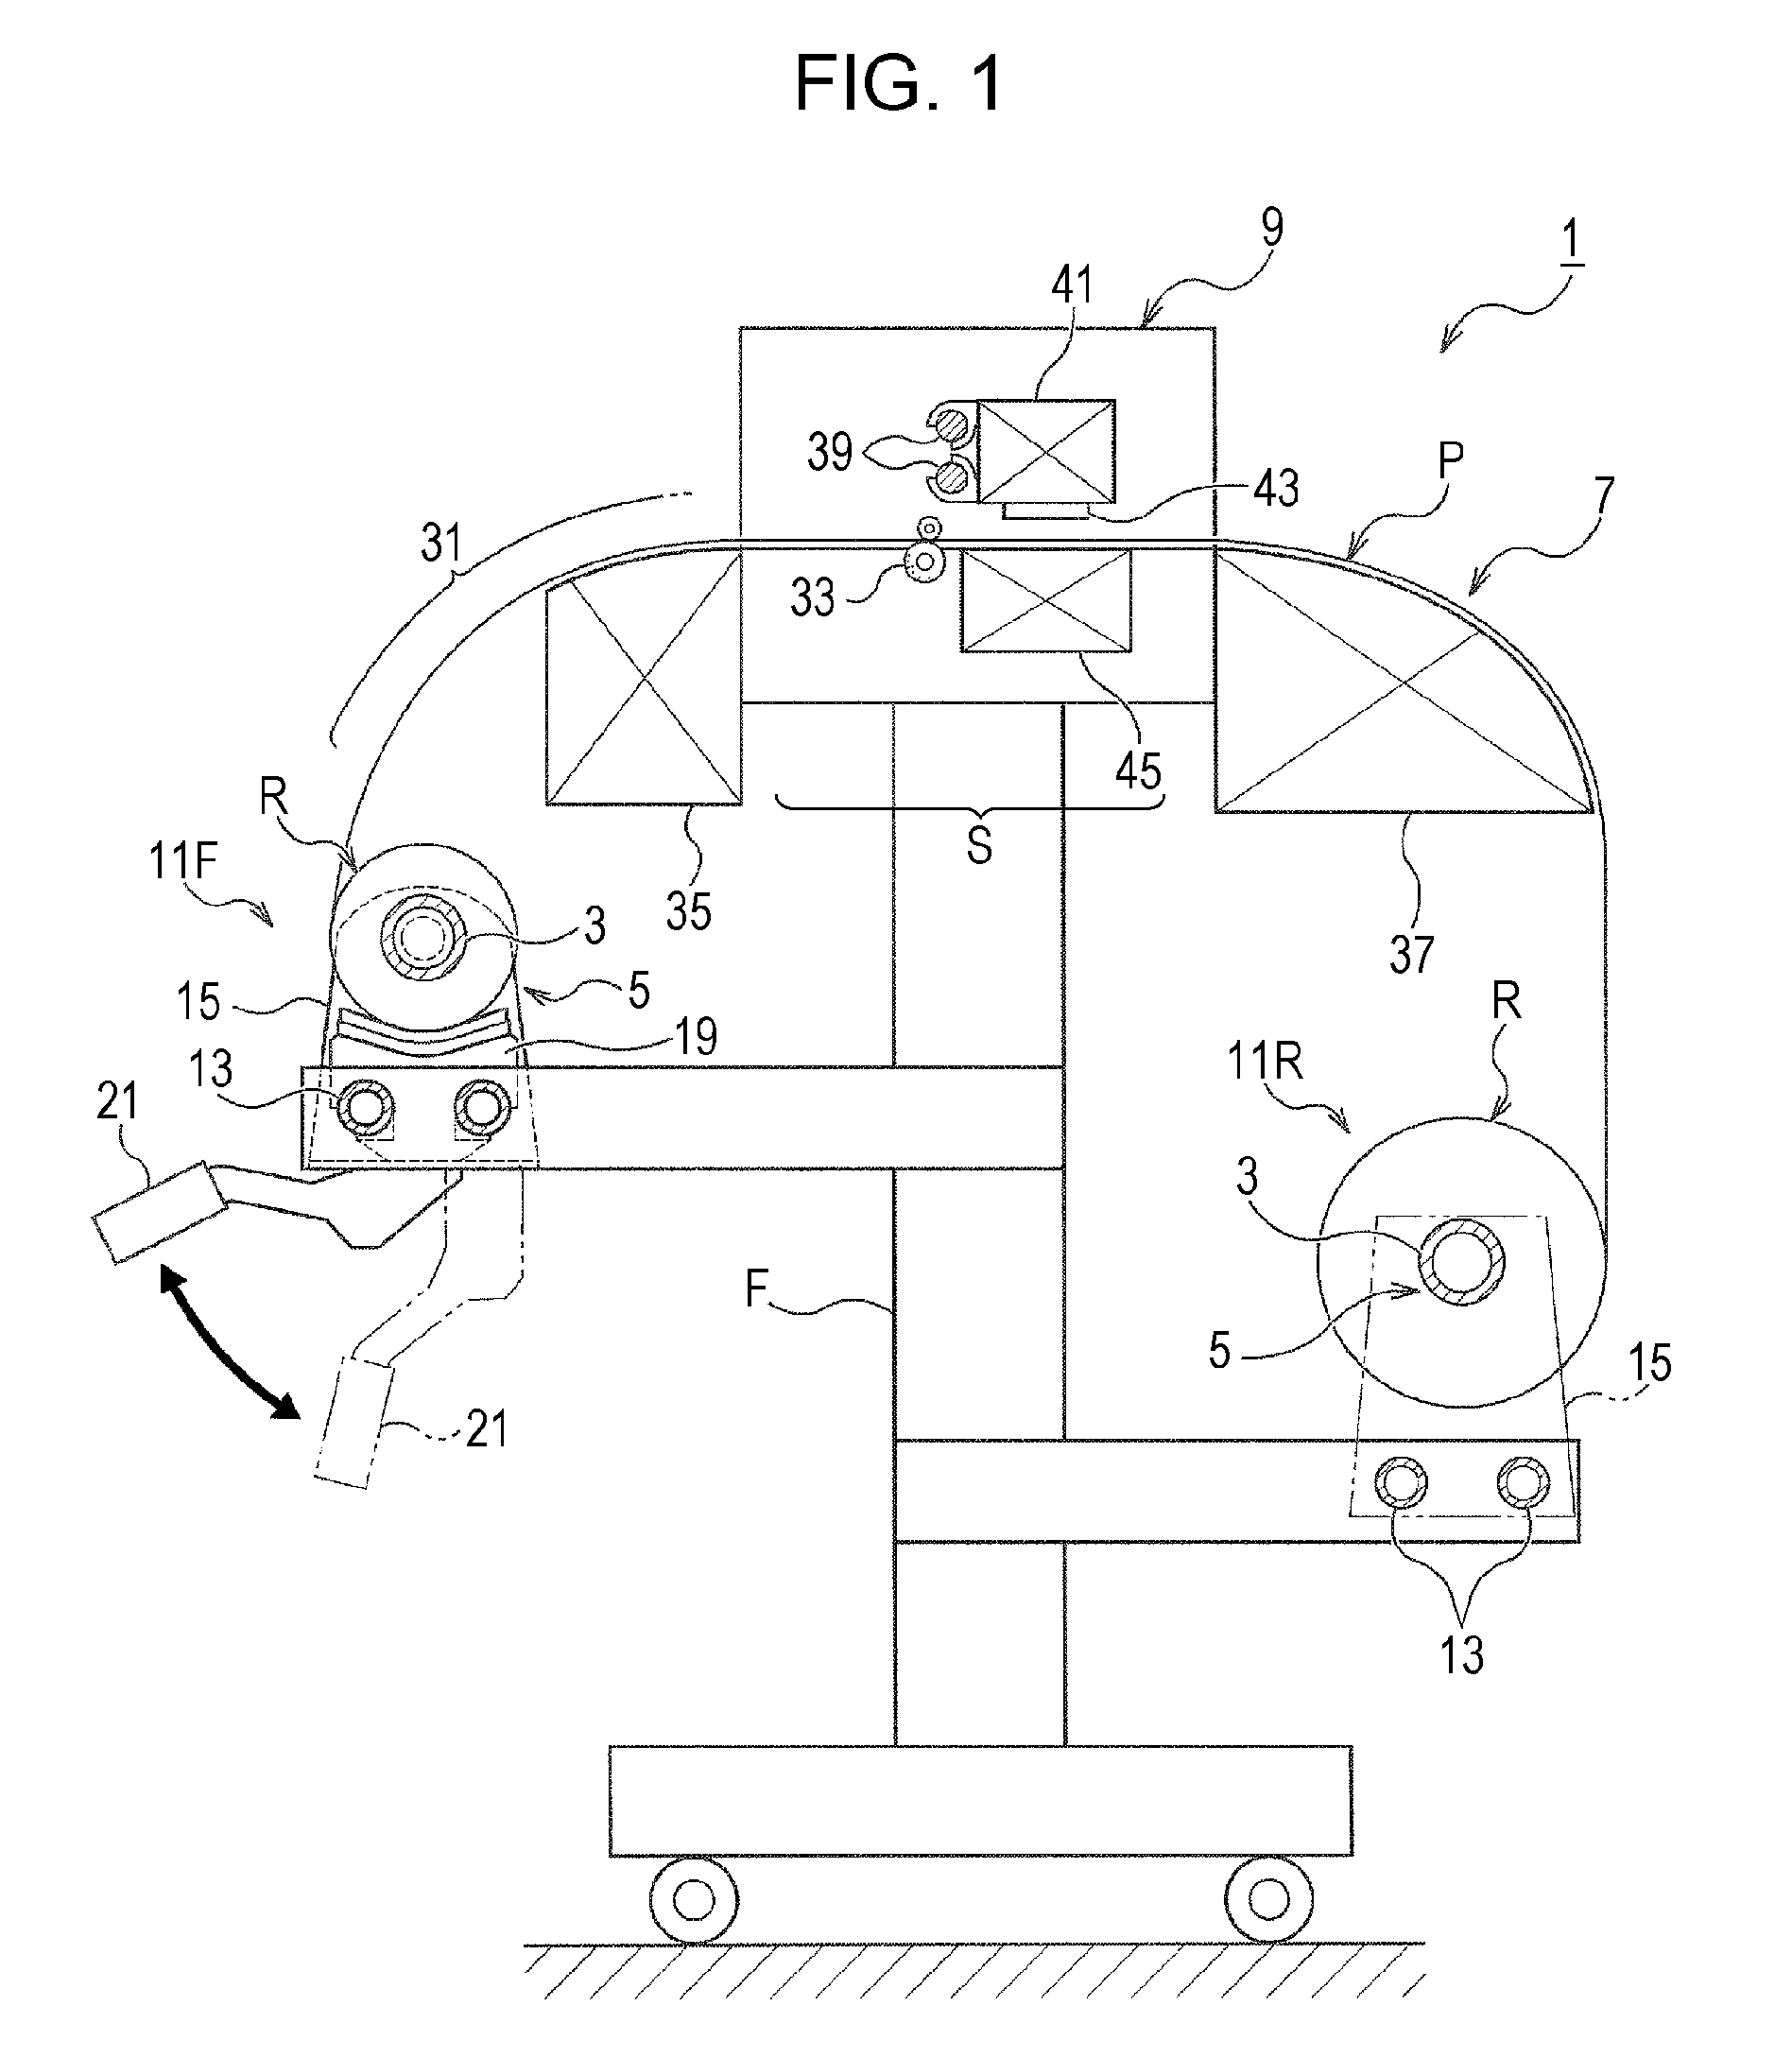 Core tube holding device and recording apparatus